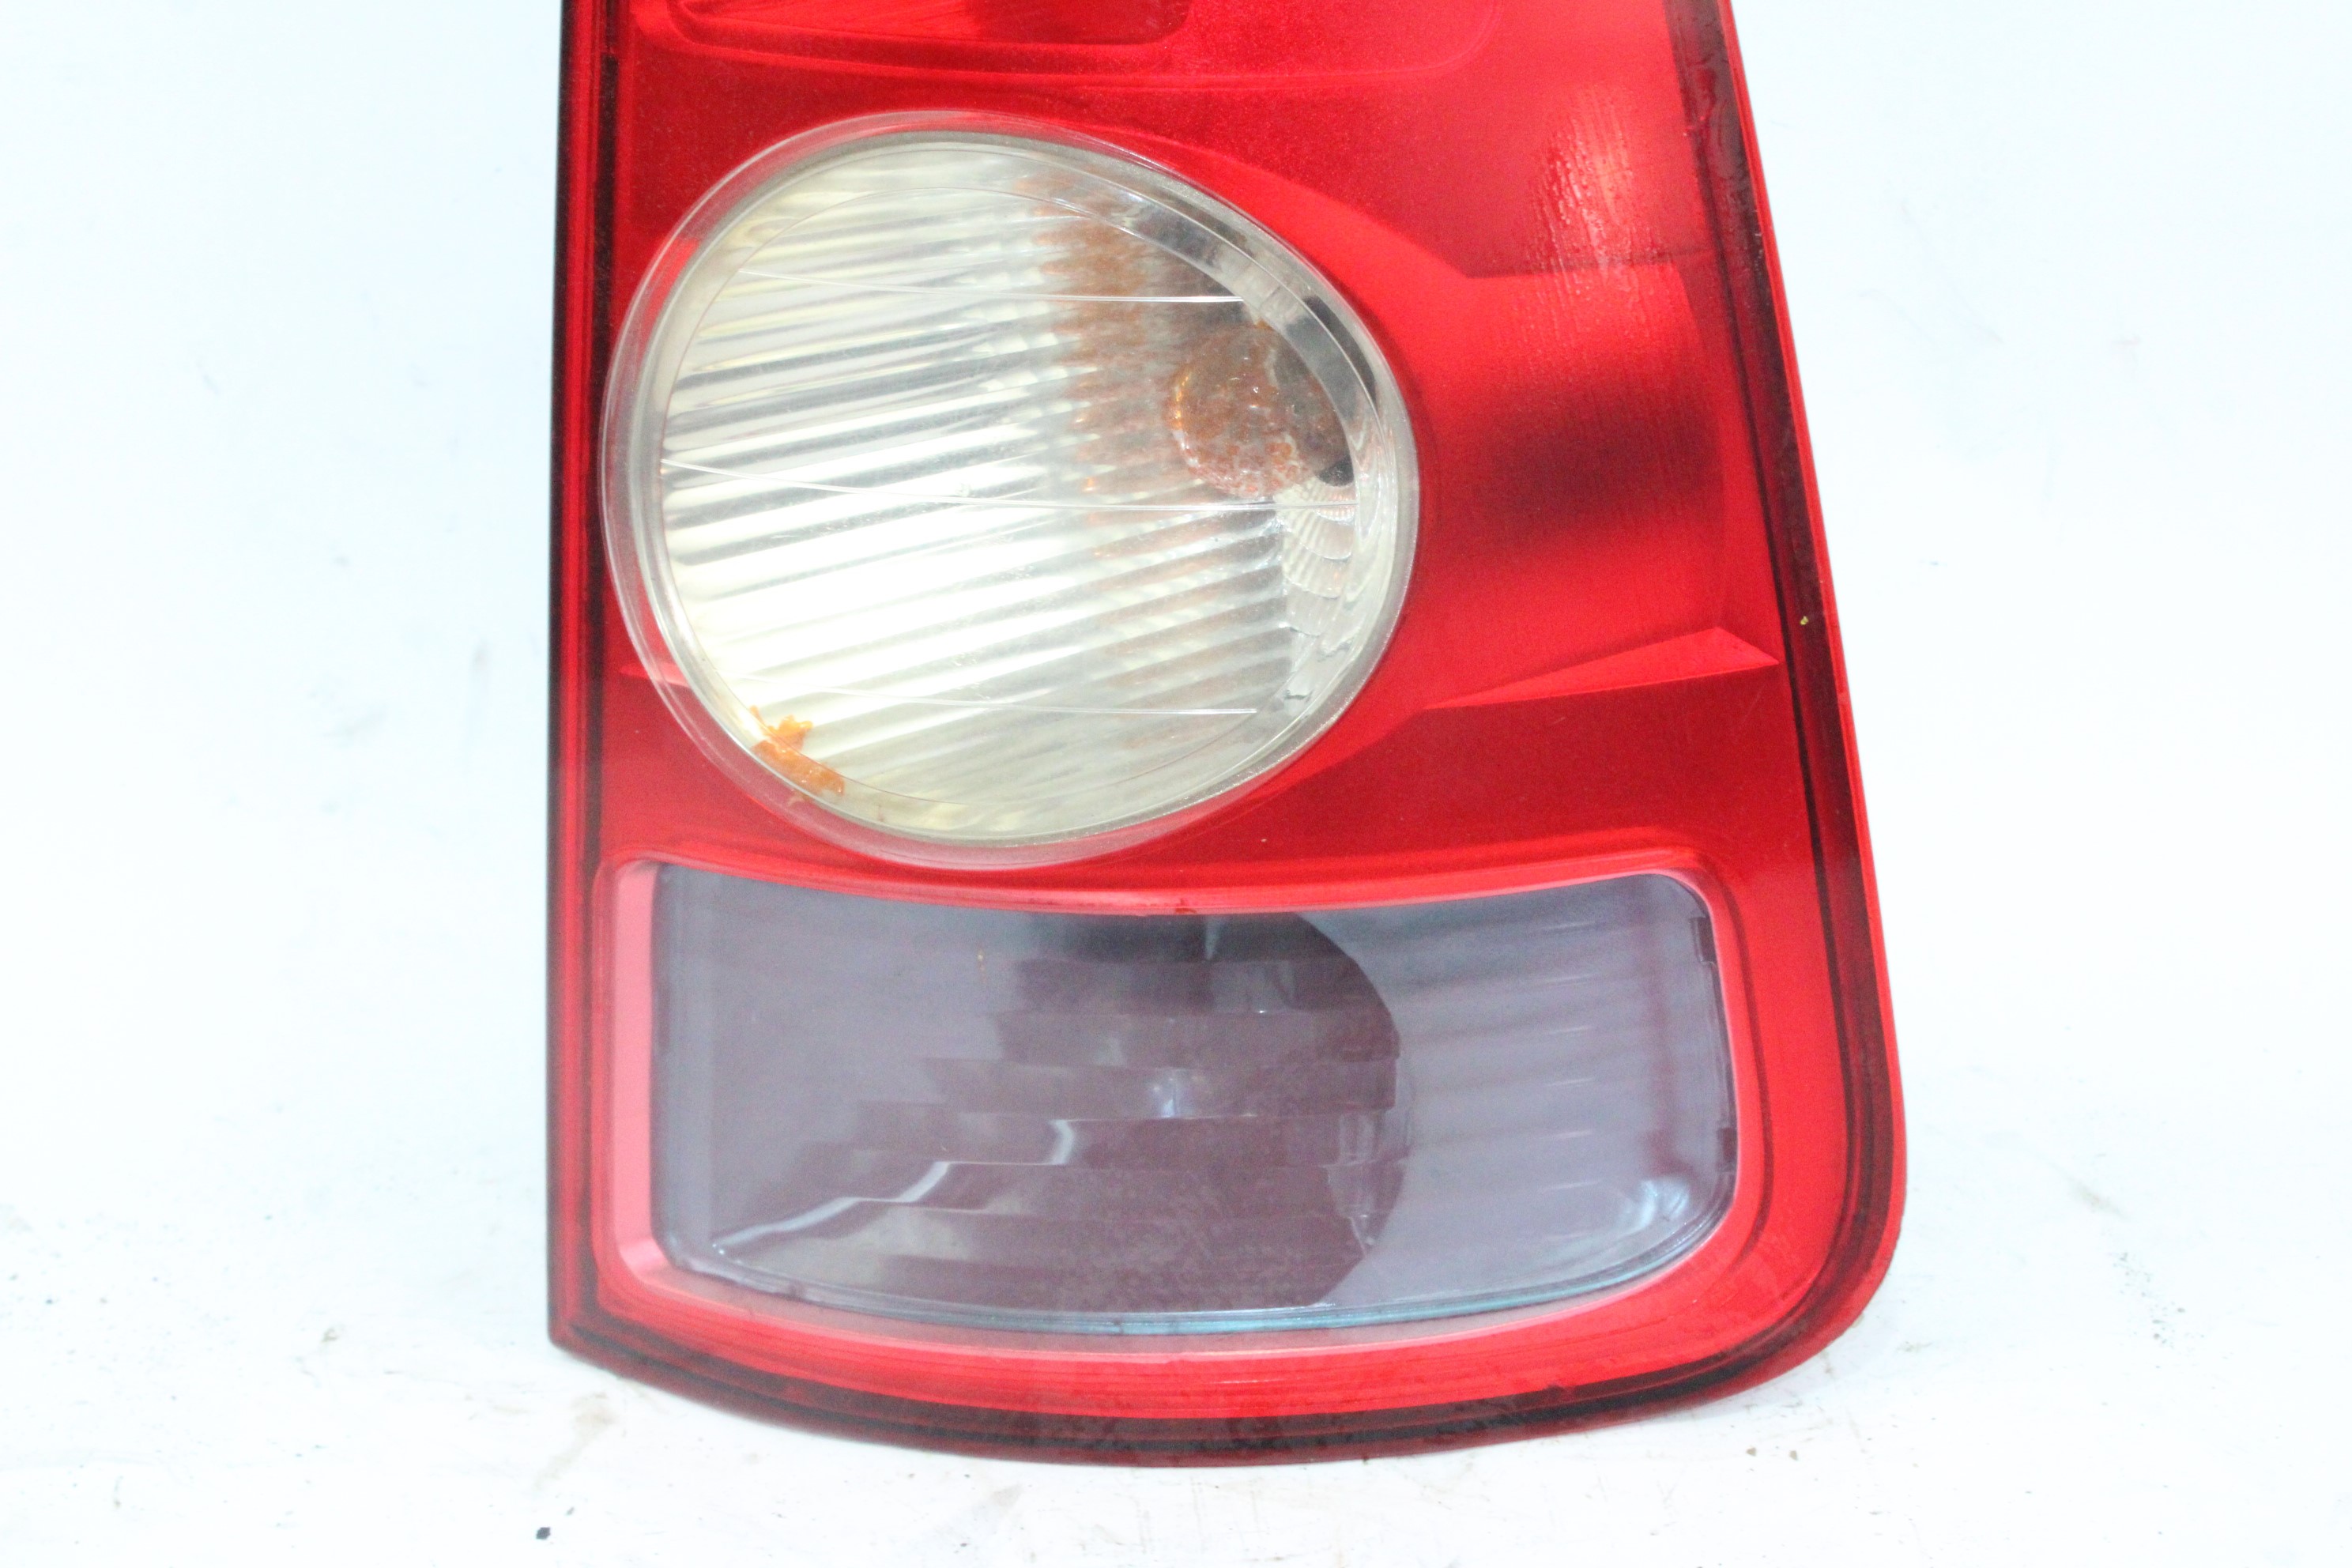 RENAULT Espace 4 generation (2002-2014) Rear Right Taillight Lamp 8200027152 23767359